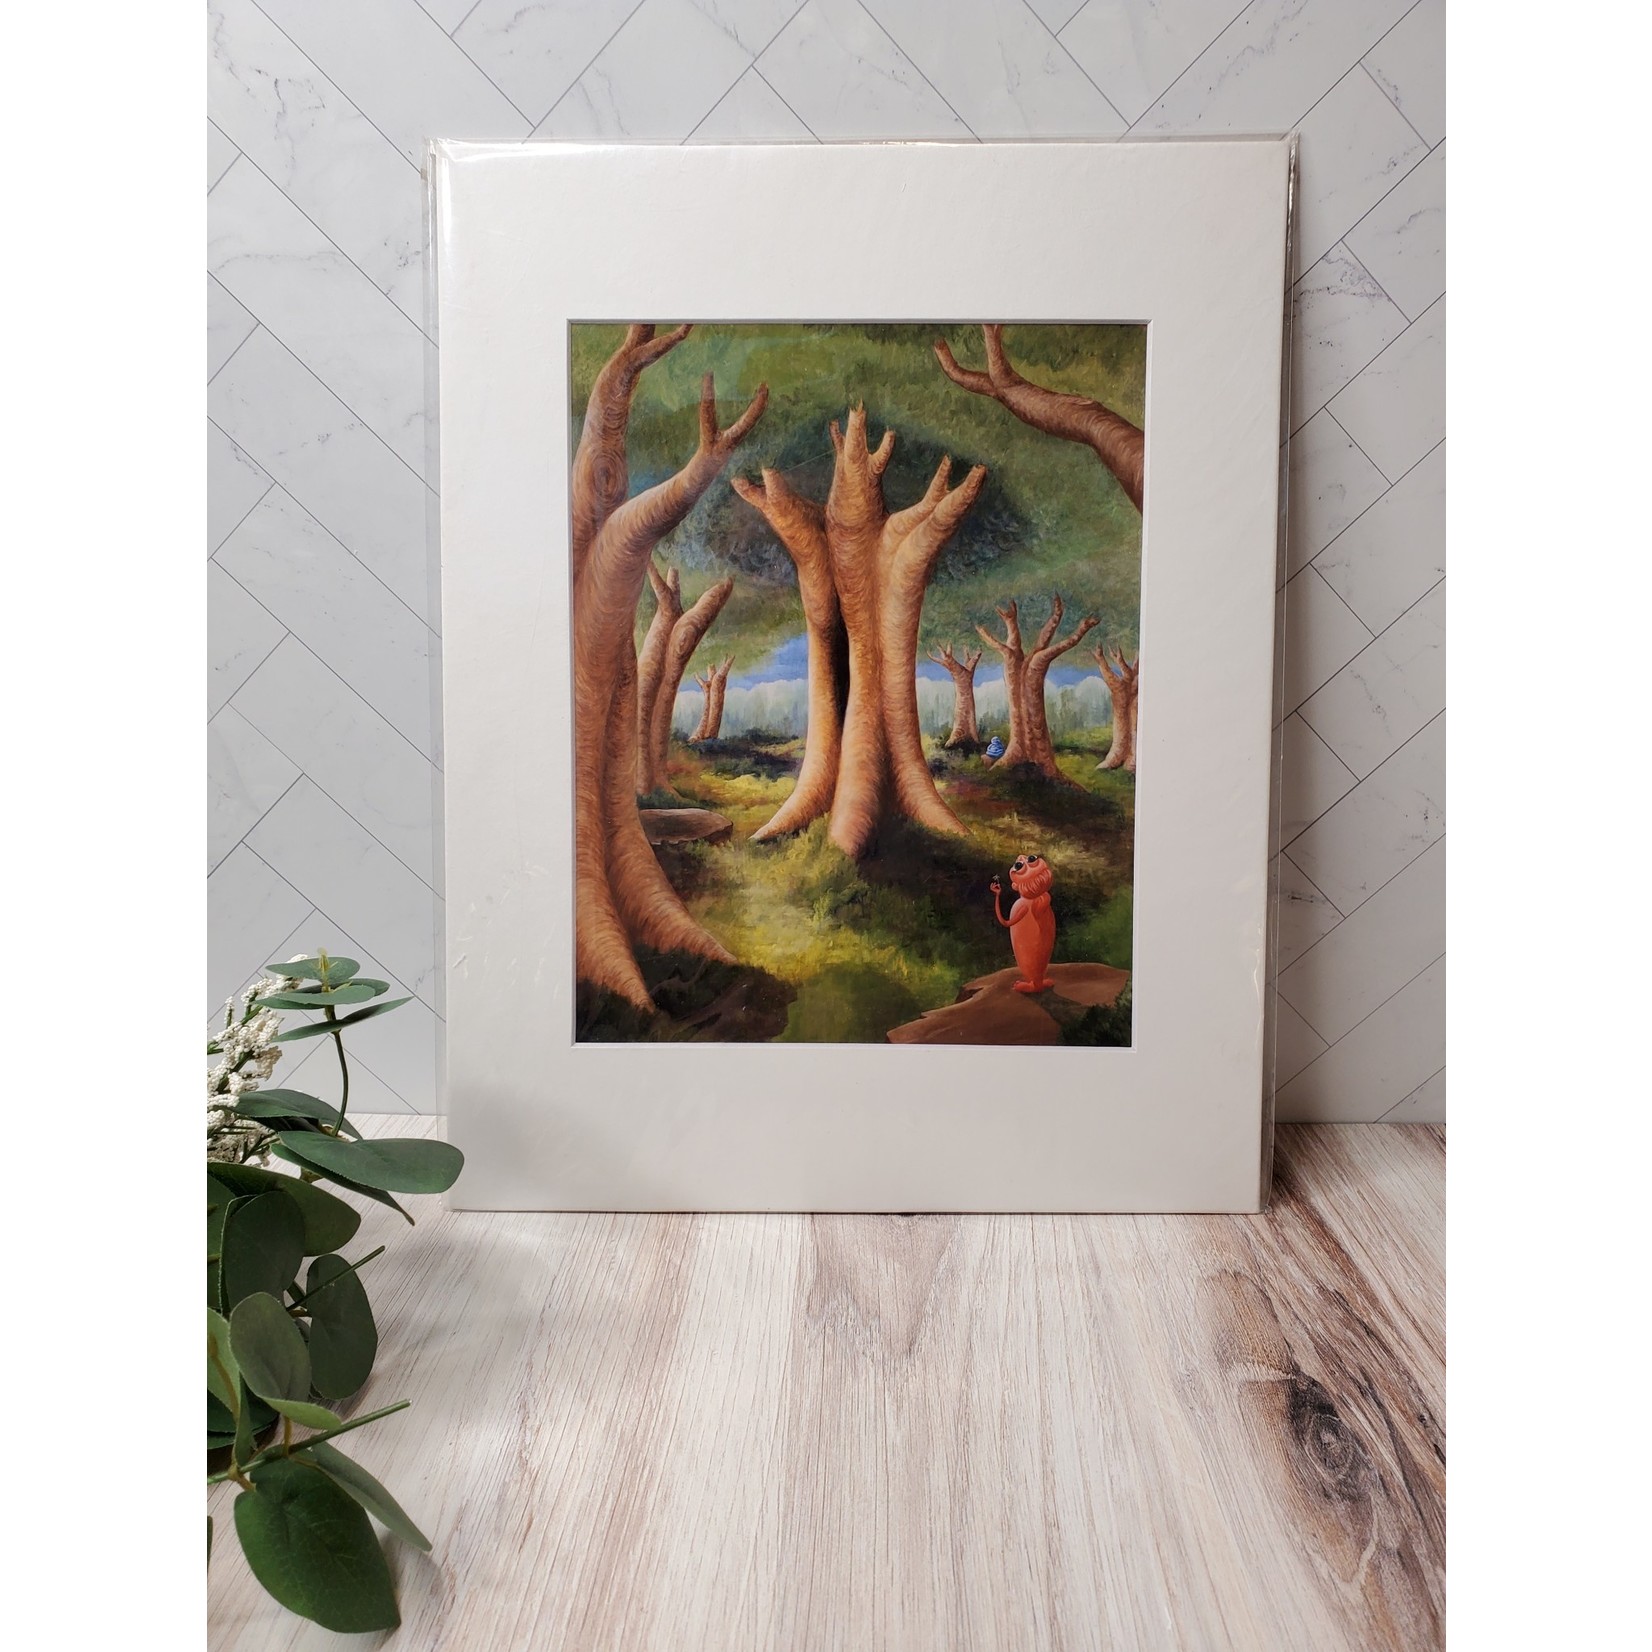 Sara L Smith "The Dreaming Trees" - archival giclee print - matted - 11x14"